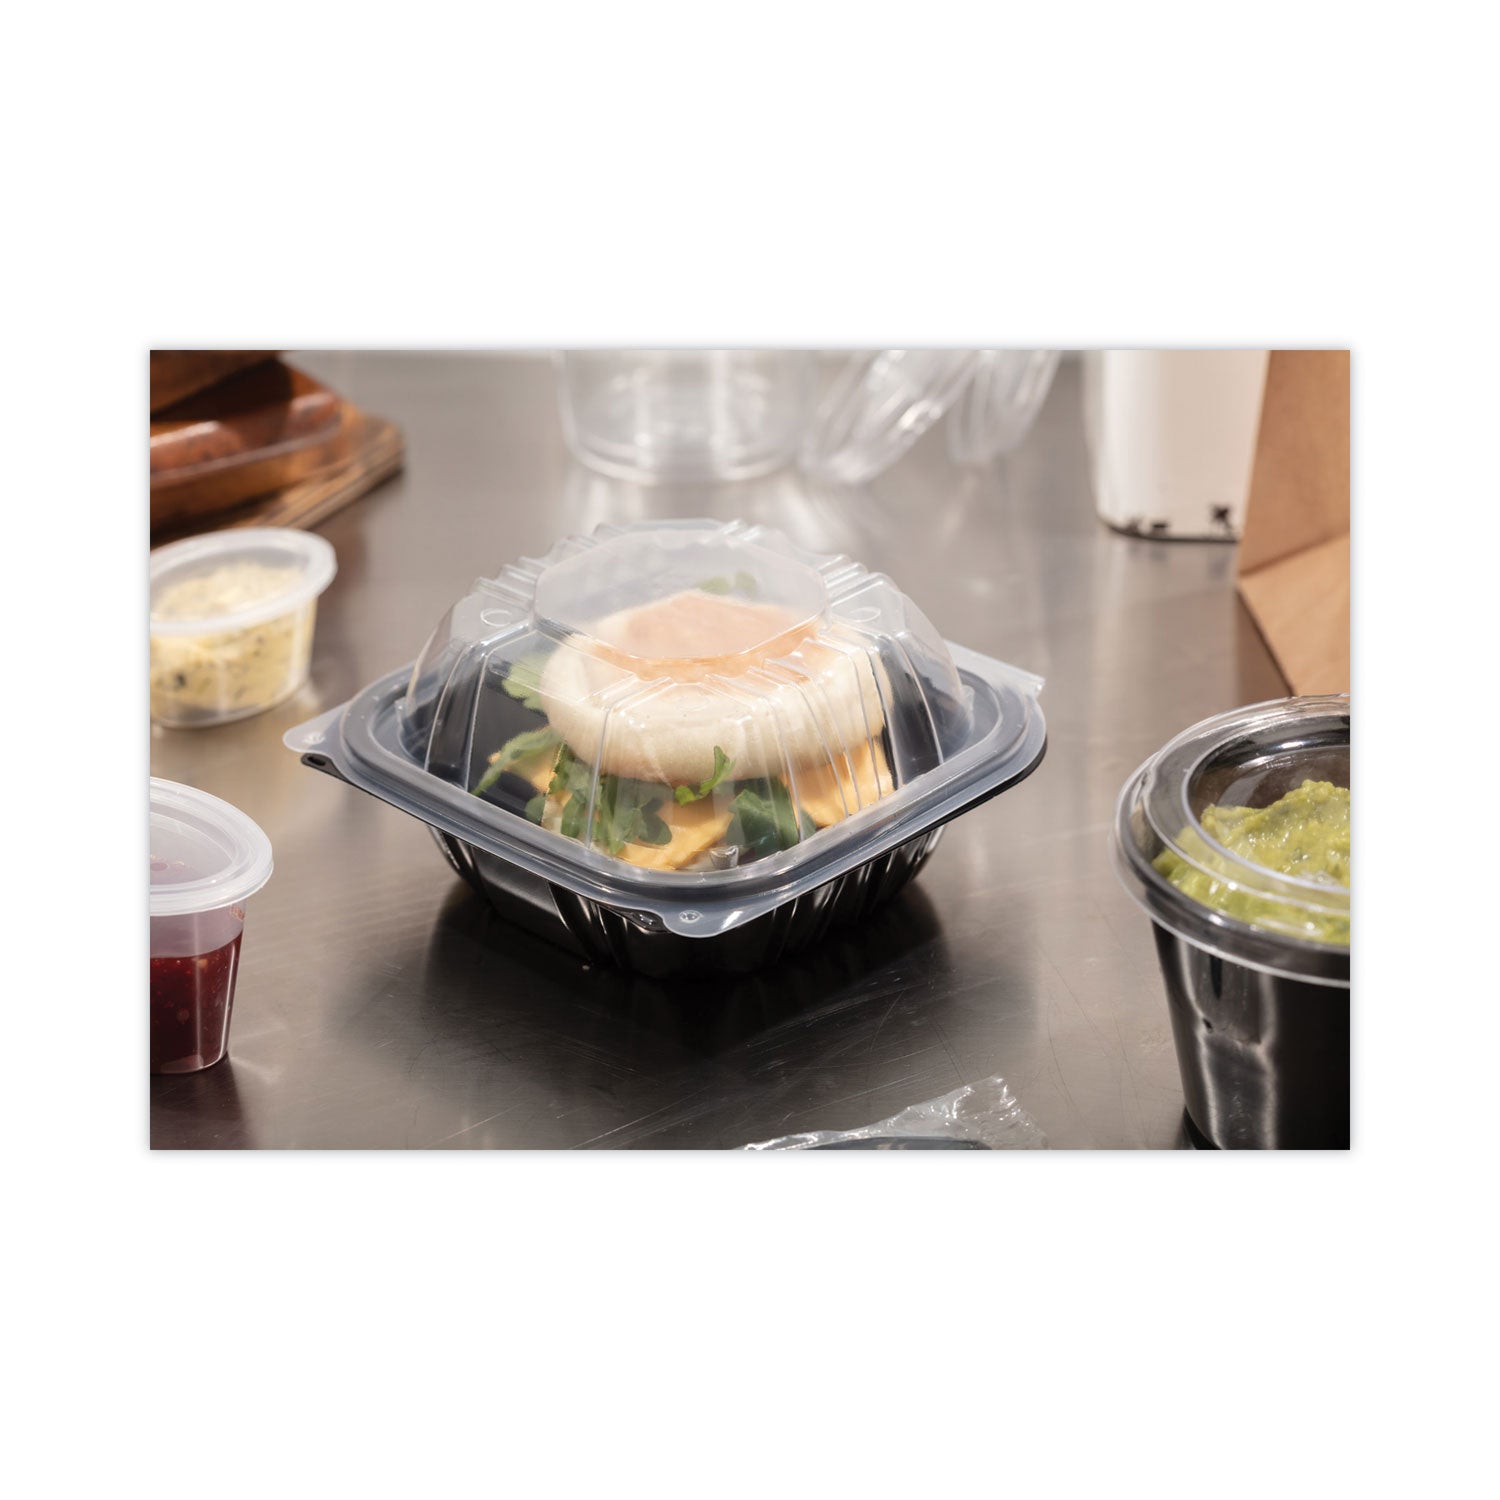 earthchoice-vented-dual-color-microwavable-hinged-lid-container-1-compartment-16oz-6-x-6-x-3-black-clear-plastic-321-ct_pctdc6610b000 - 5